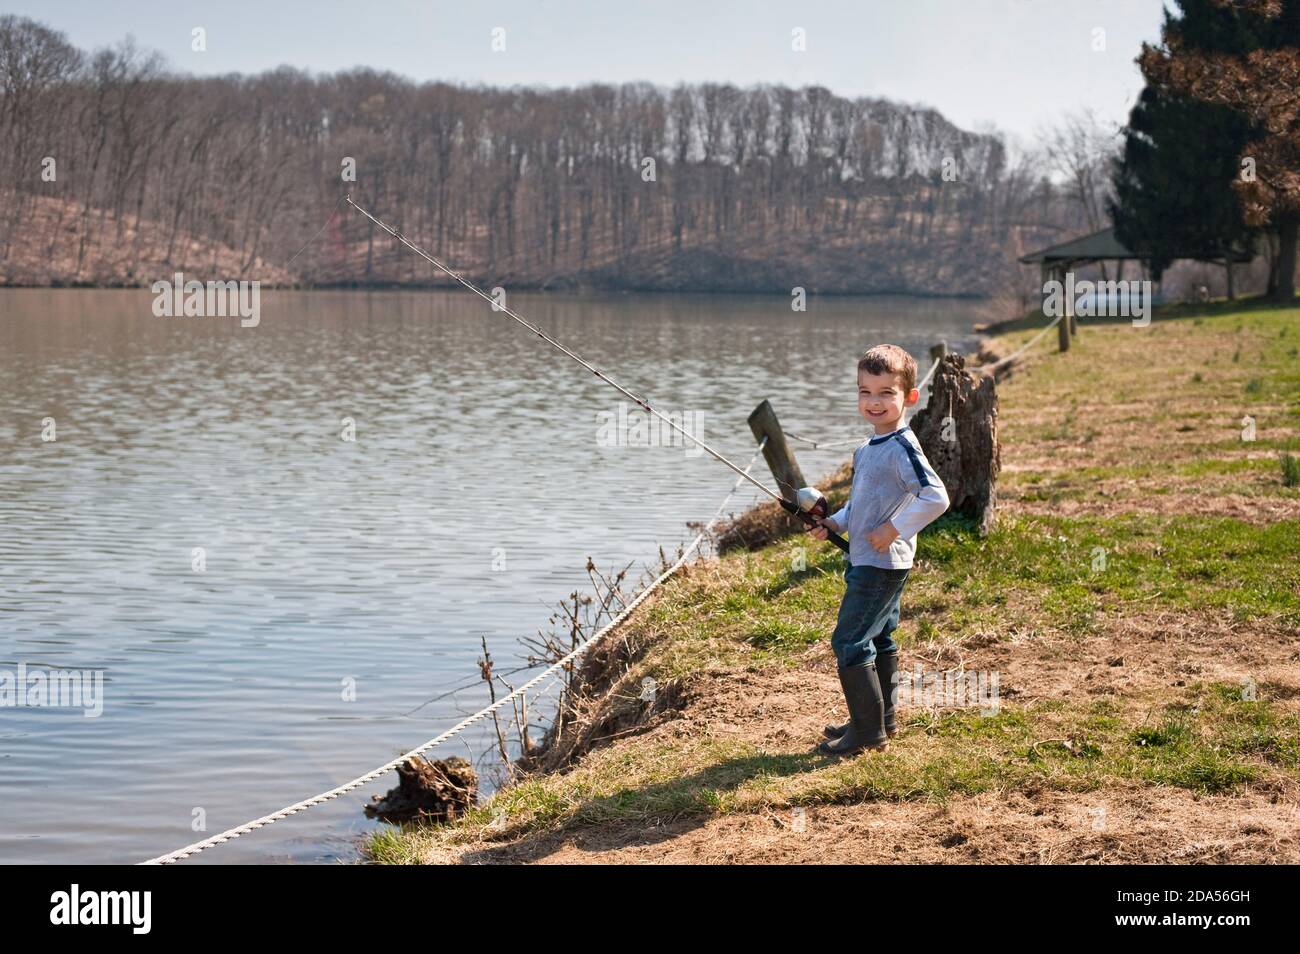 YOUNG BOY FISHING AT SPEEDWELL FORGE LAKE, LANCASTER COUNTY, PENNSYLVANIA Stock Photo